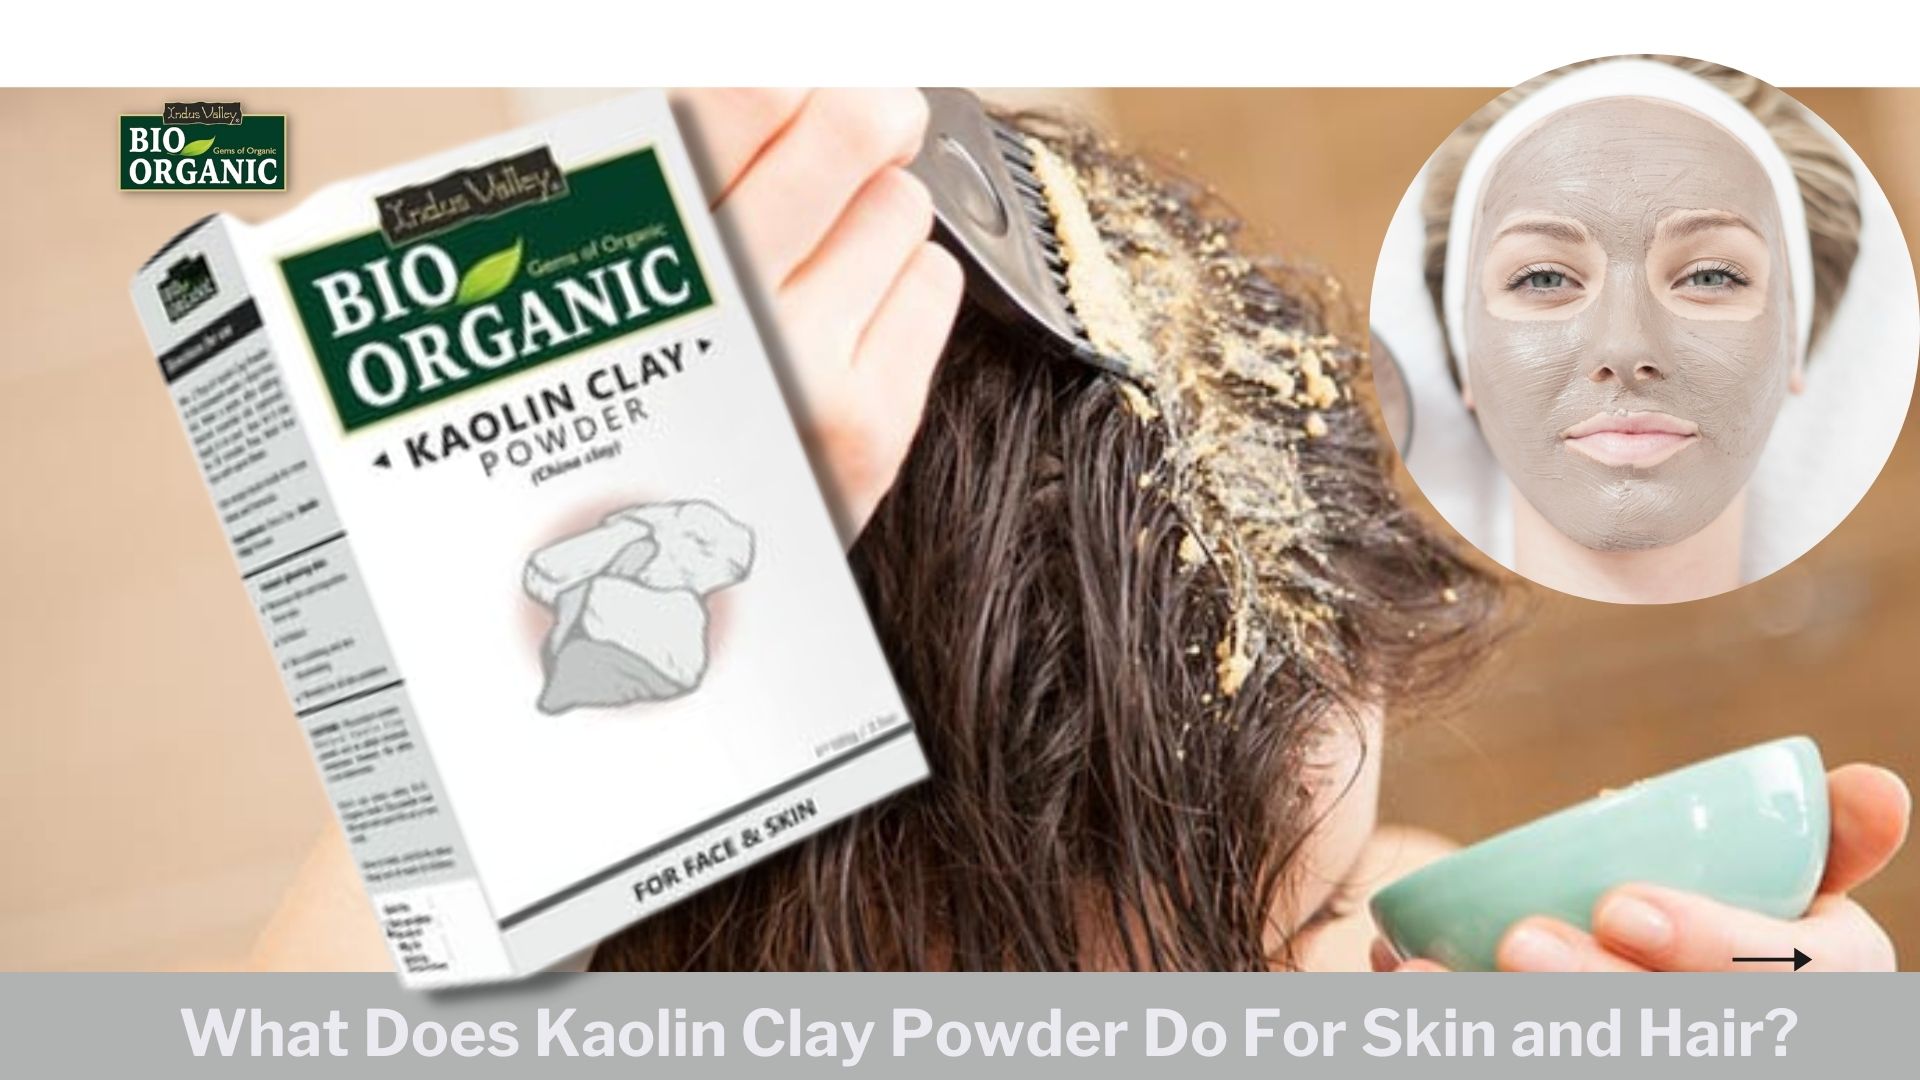 What Does Kaolin Clay Powder Do For Skin and Hair?